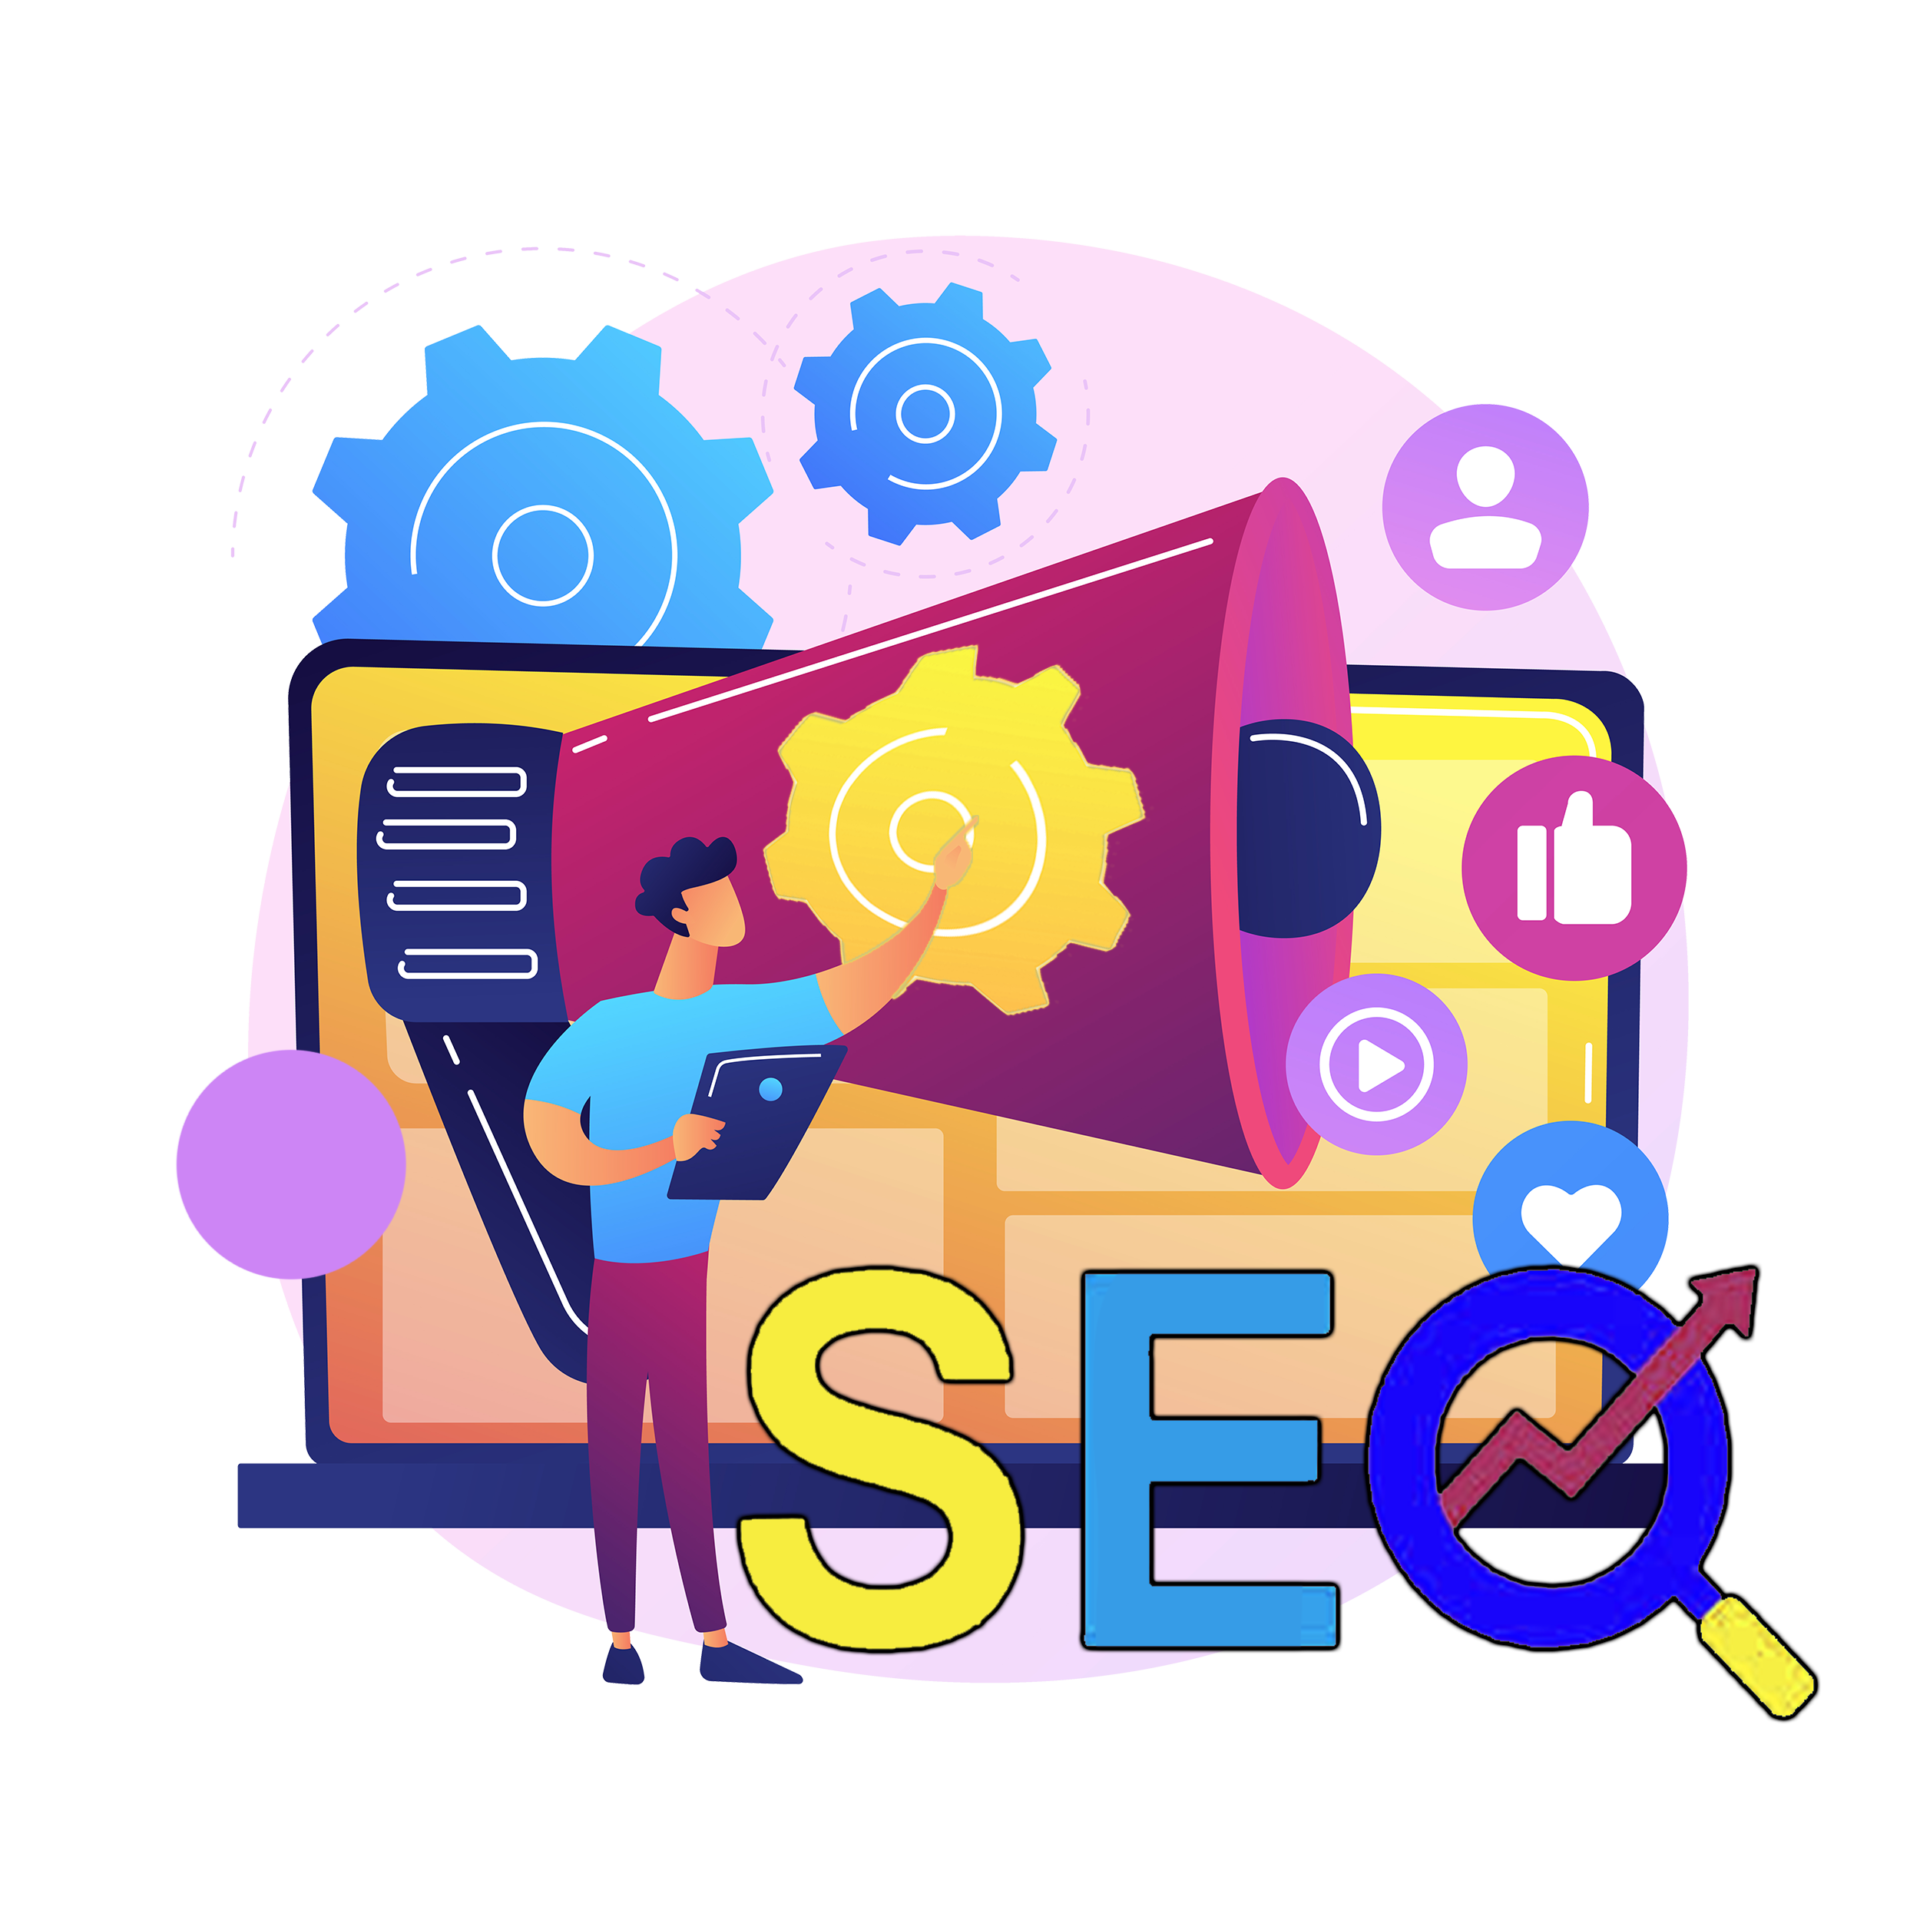 Affordable SEO packages